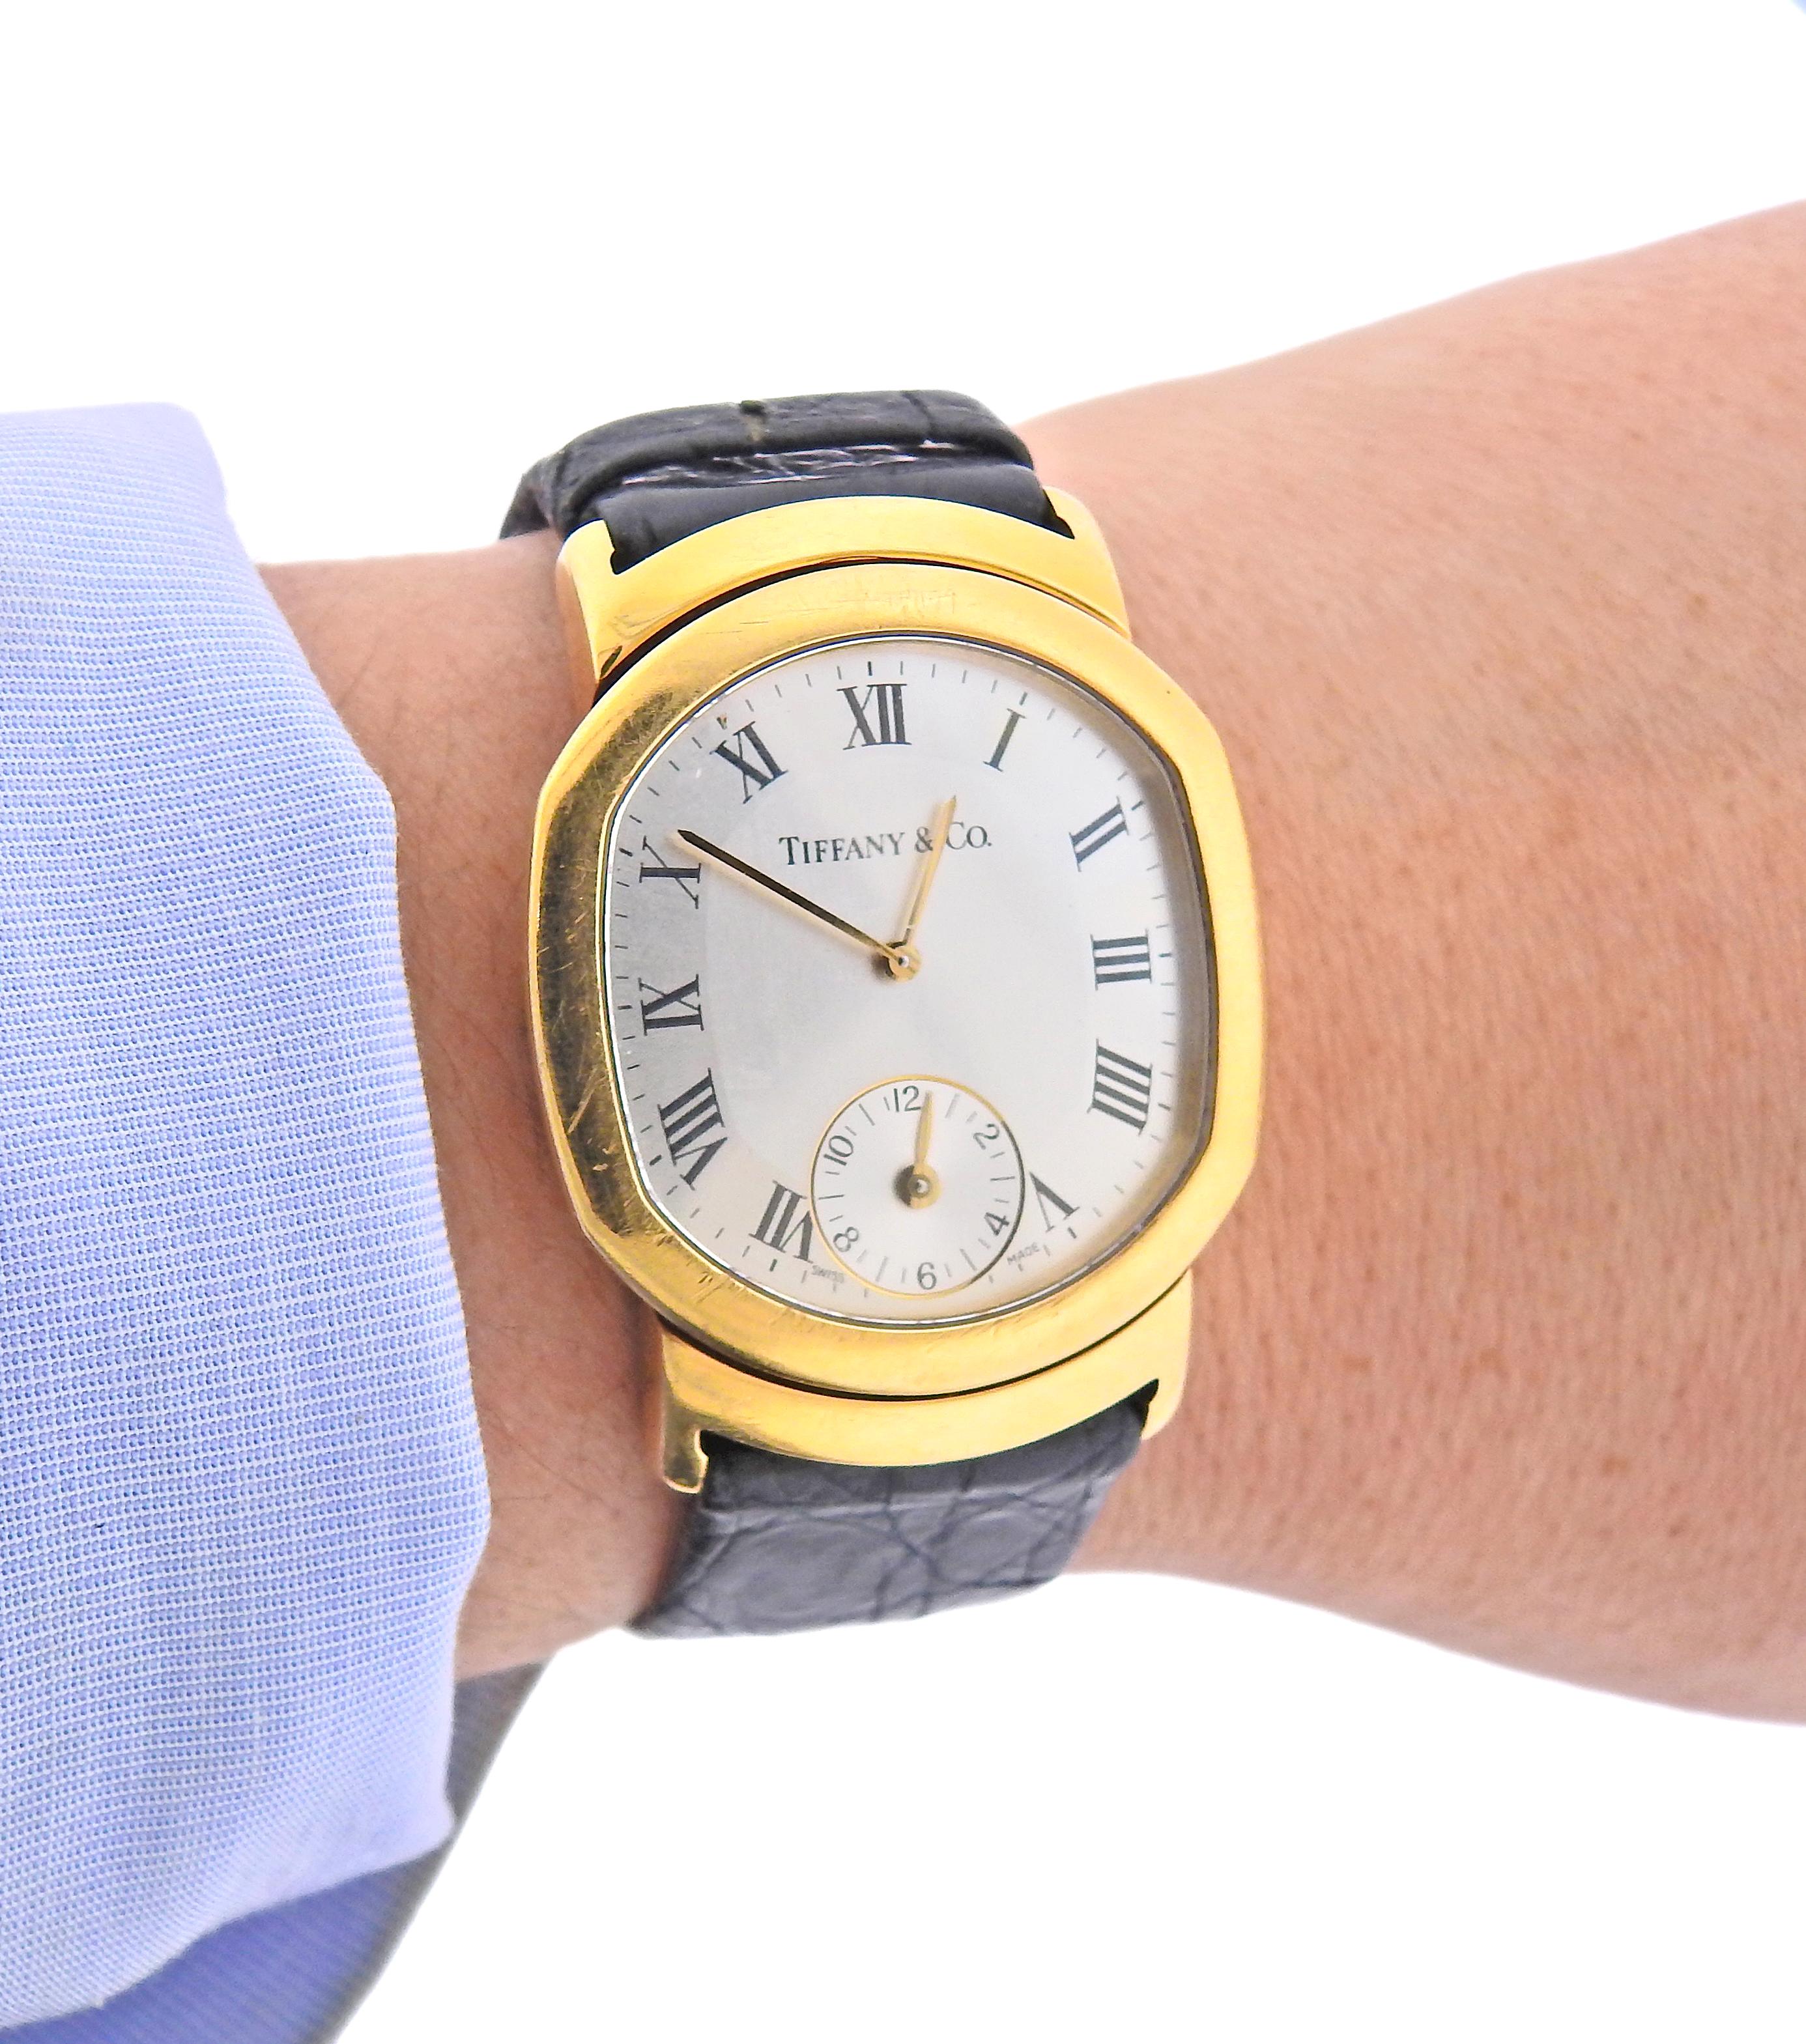 Tiffany & Co. Gold Watch In Excellent Condition For Sale In New York, NY